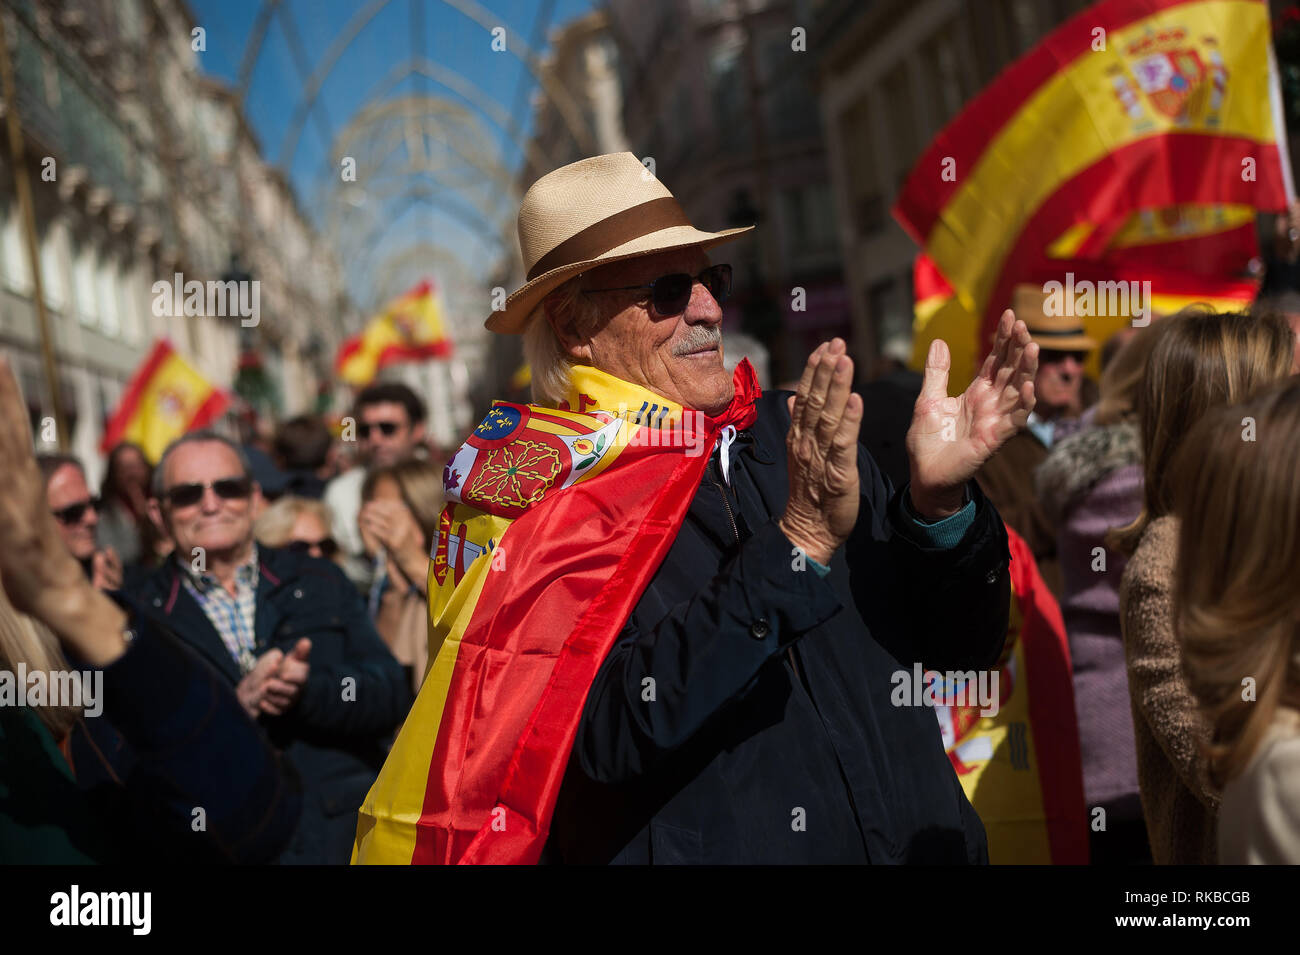 A supporter of the unite between Spain and Catalonia called by right parties, is seen applauding with a Spanish flag as he takes part in a demonstration against the Spanish government of Pedro Sánchez. Stock Photo